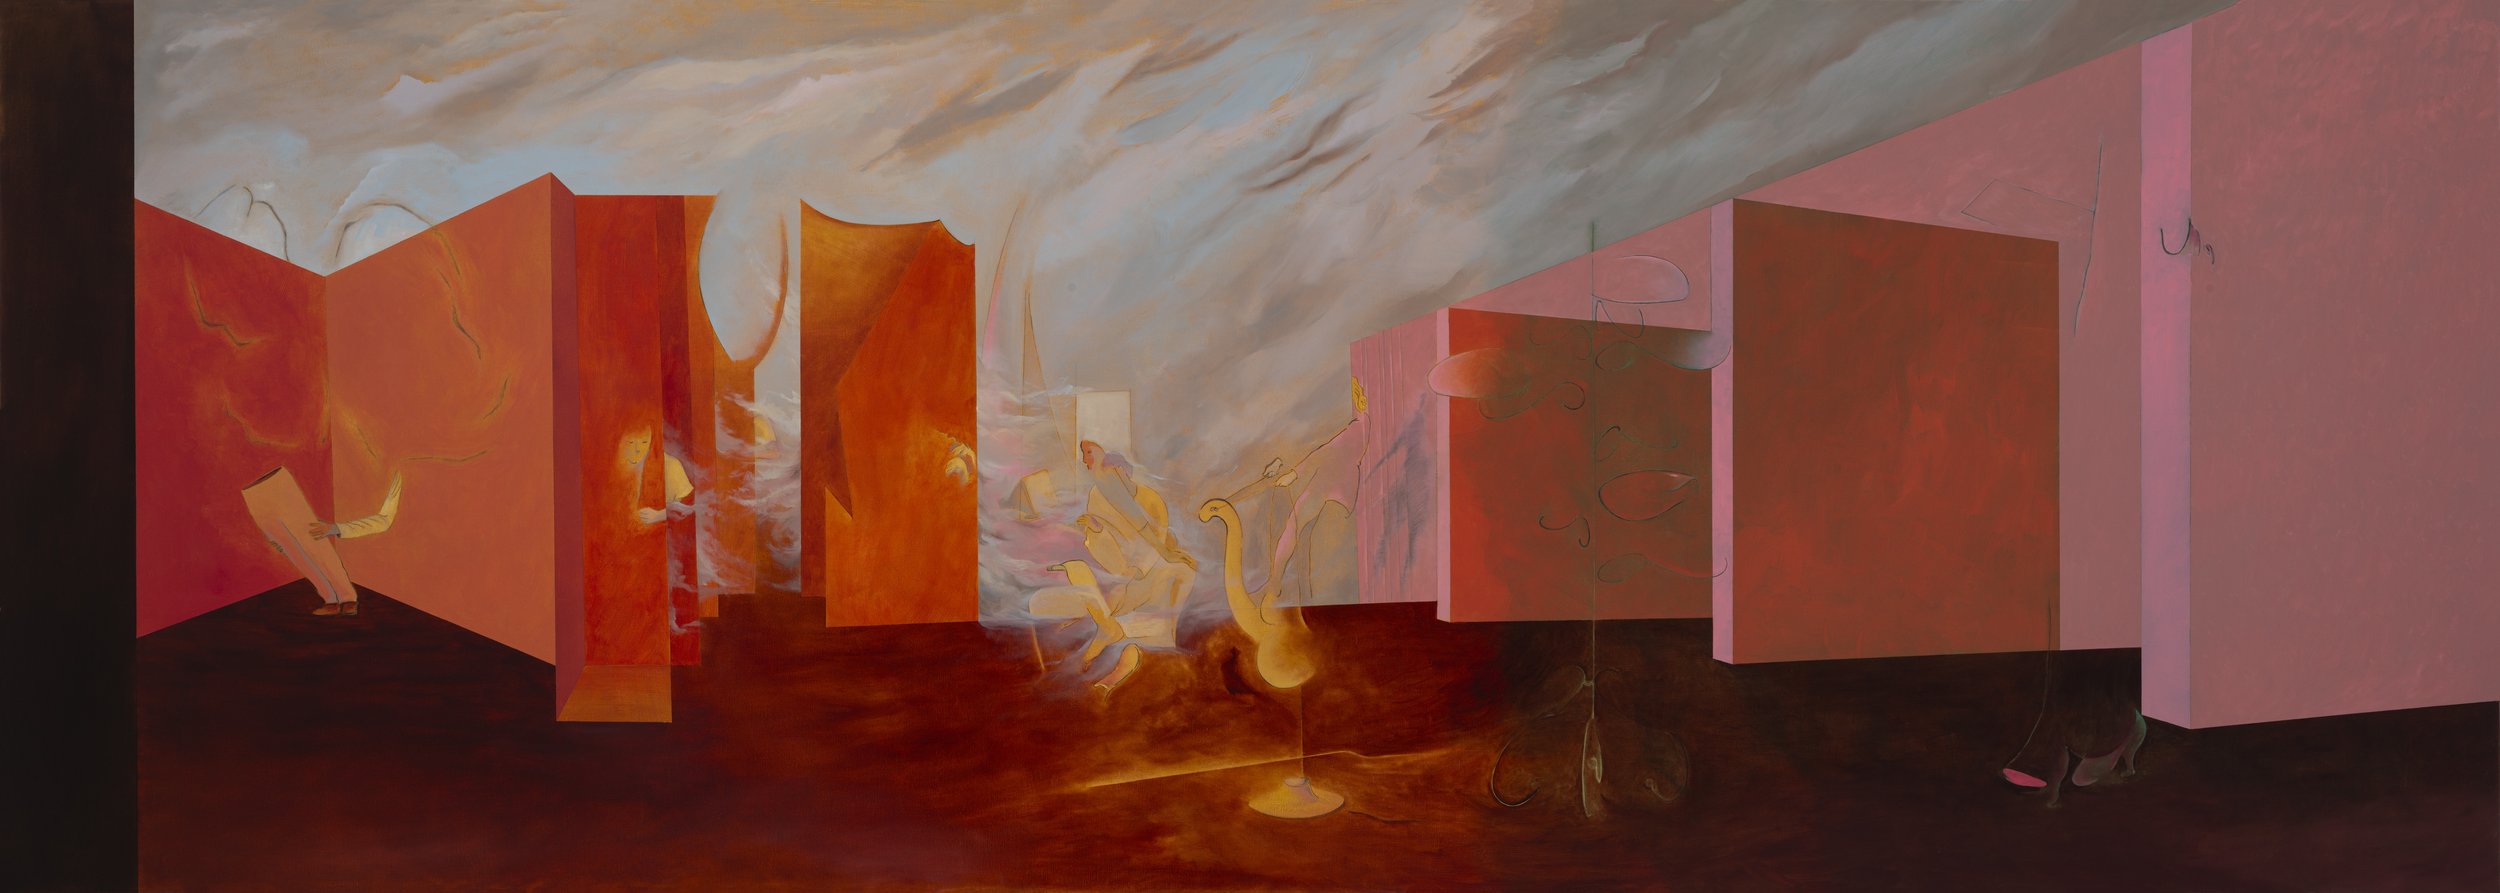  Leo Marz,  Venetian Blinds and Dry Ice Always Look Futuristic , 2023, oil on linen, 45 1/2 x 127 1/2 inches 